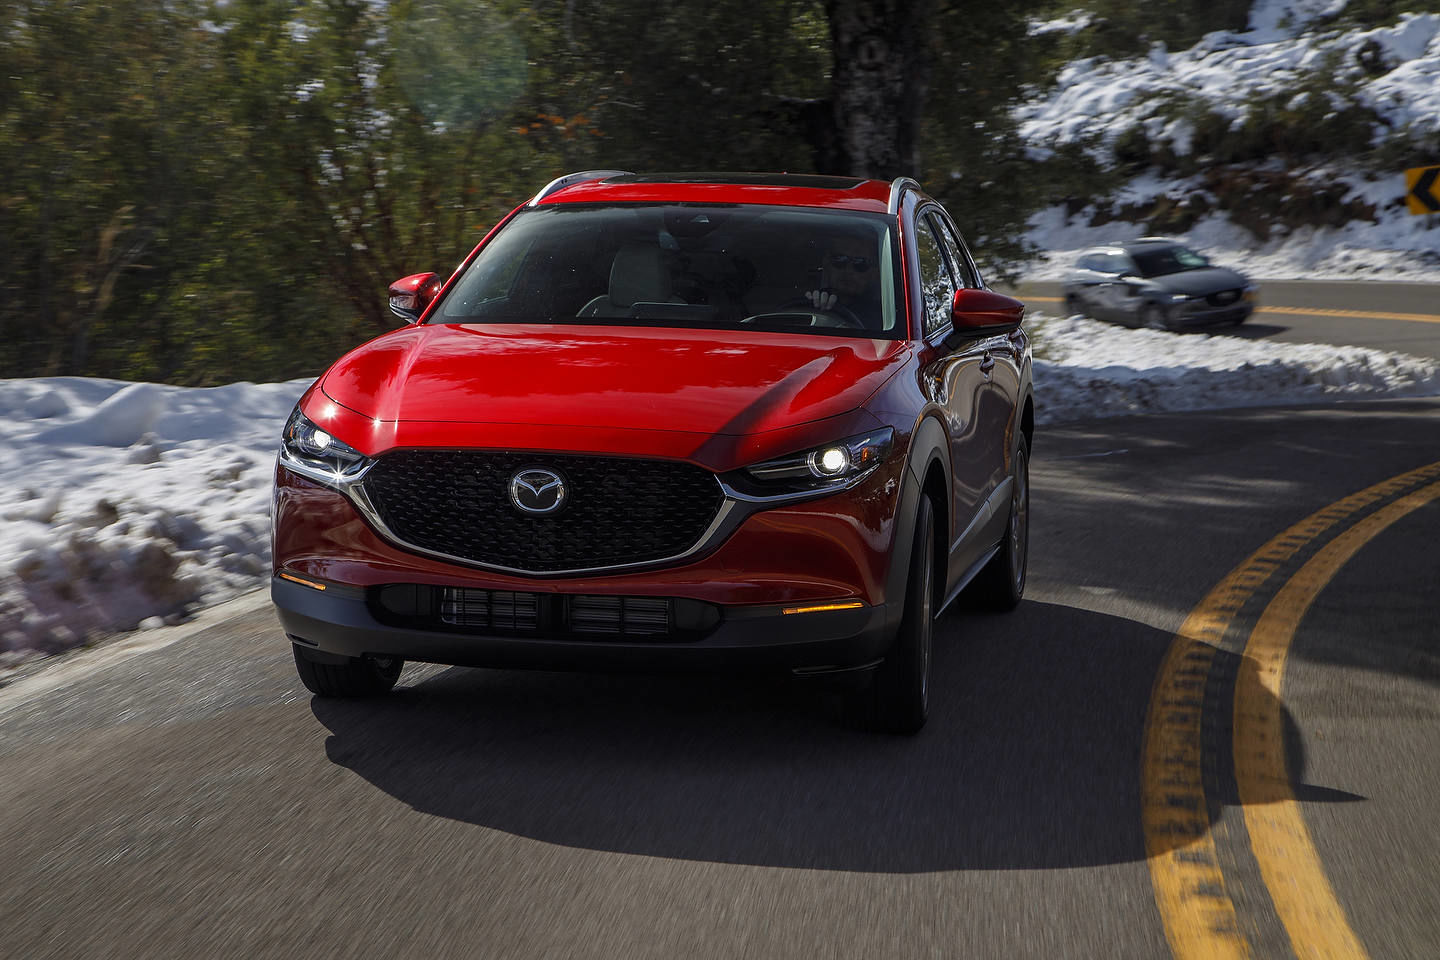 The Benefits of Mazda's i-ActivSense for Drivers